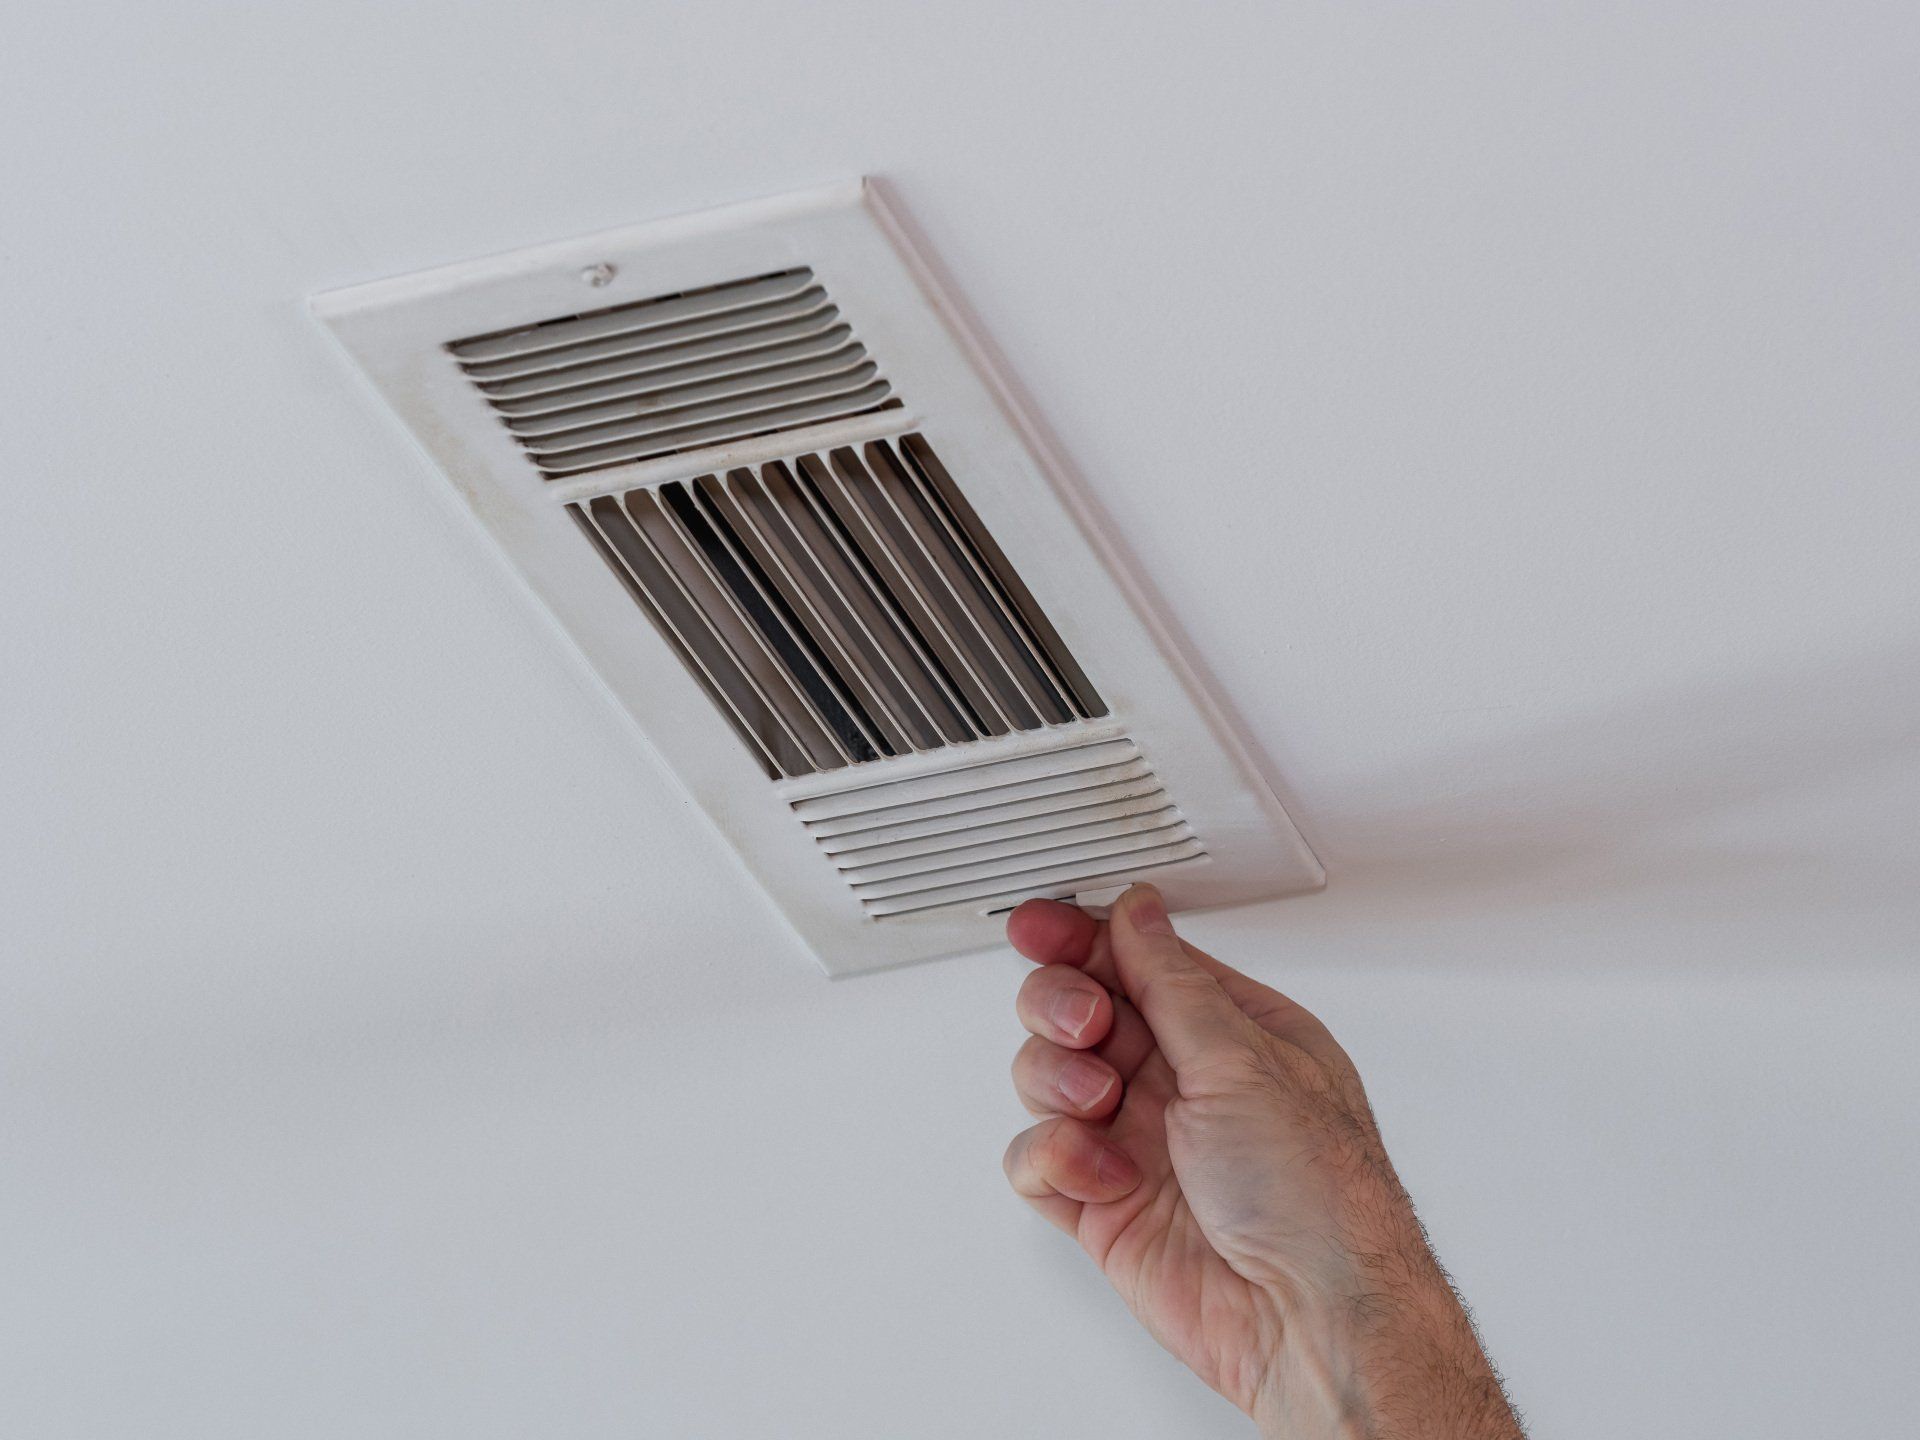 Hand opening air vent.